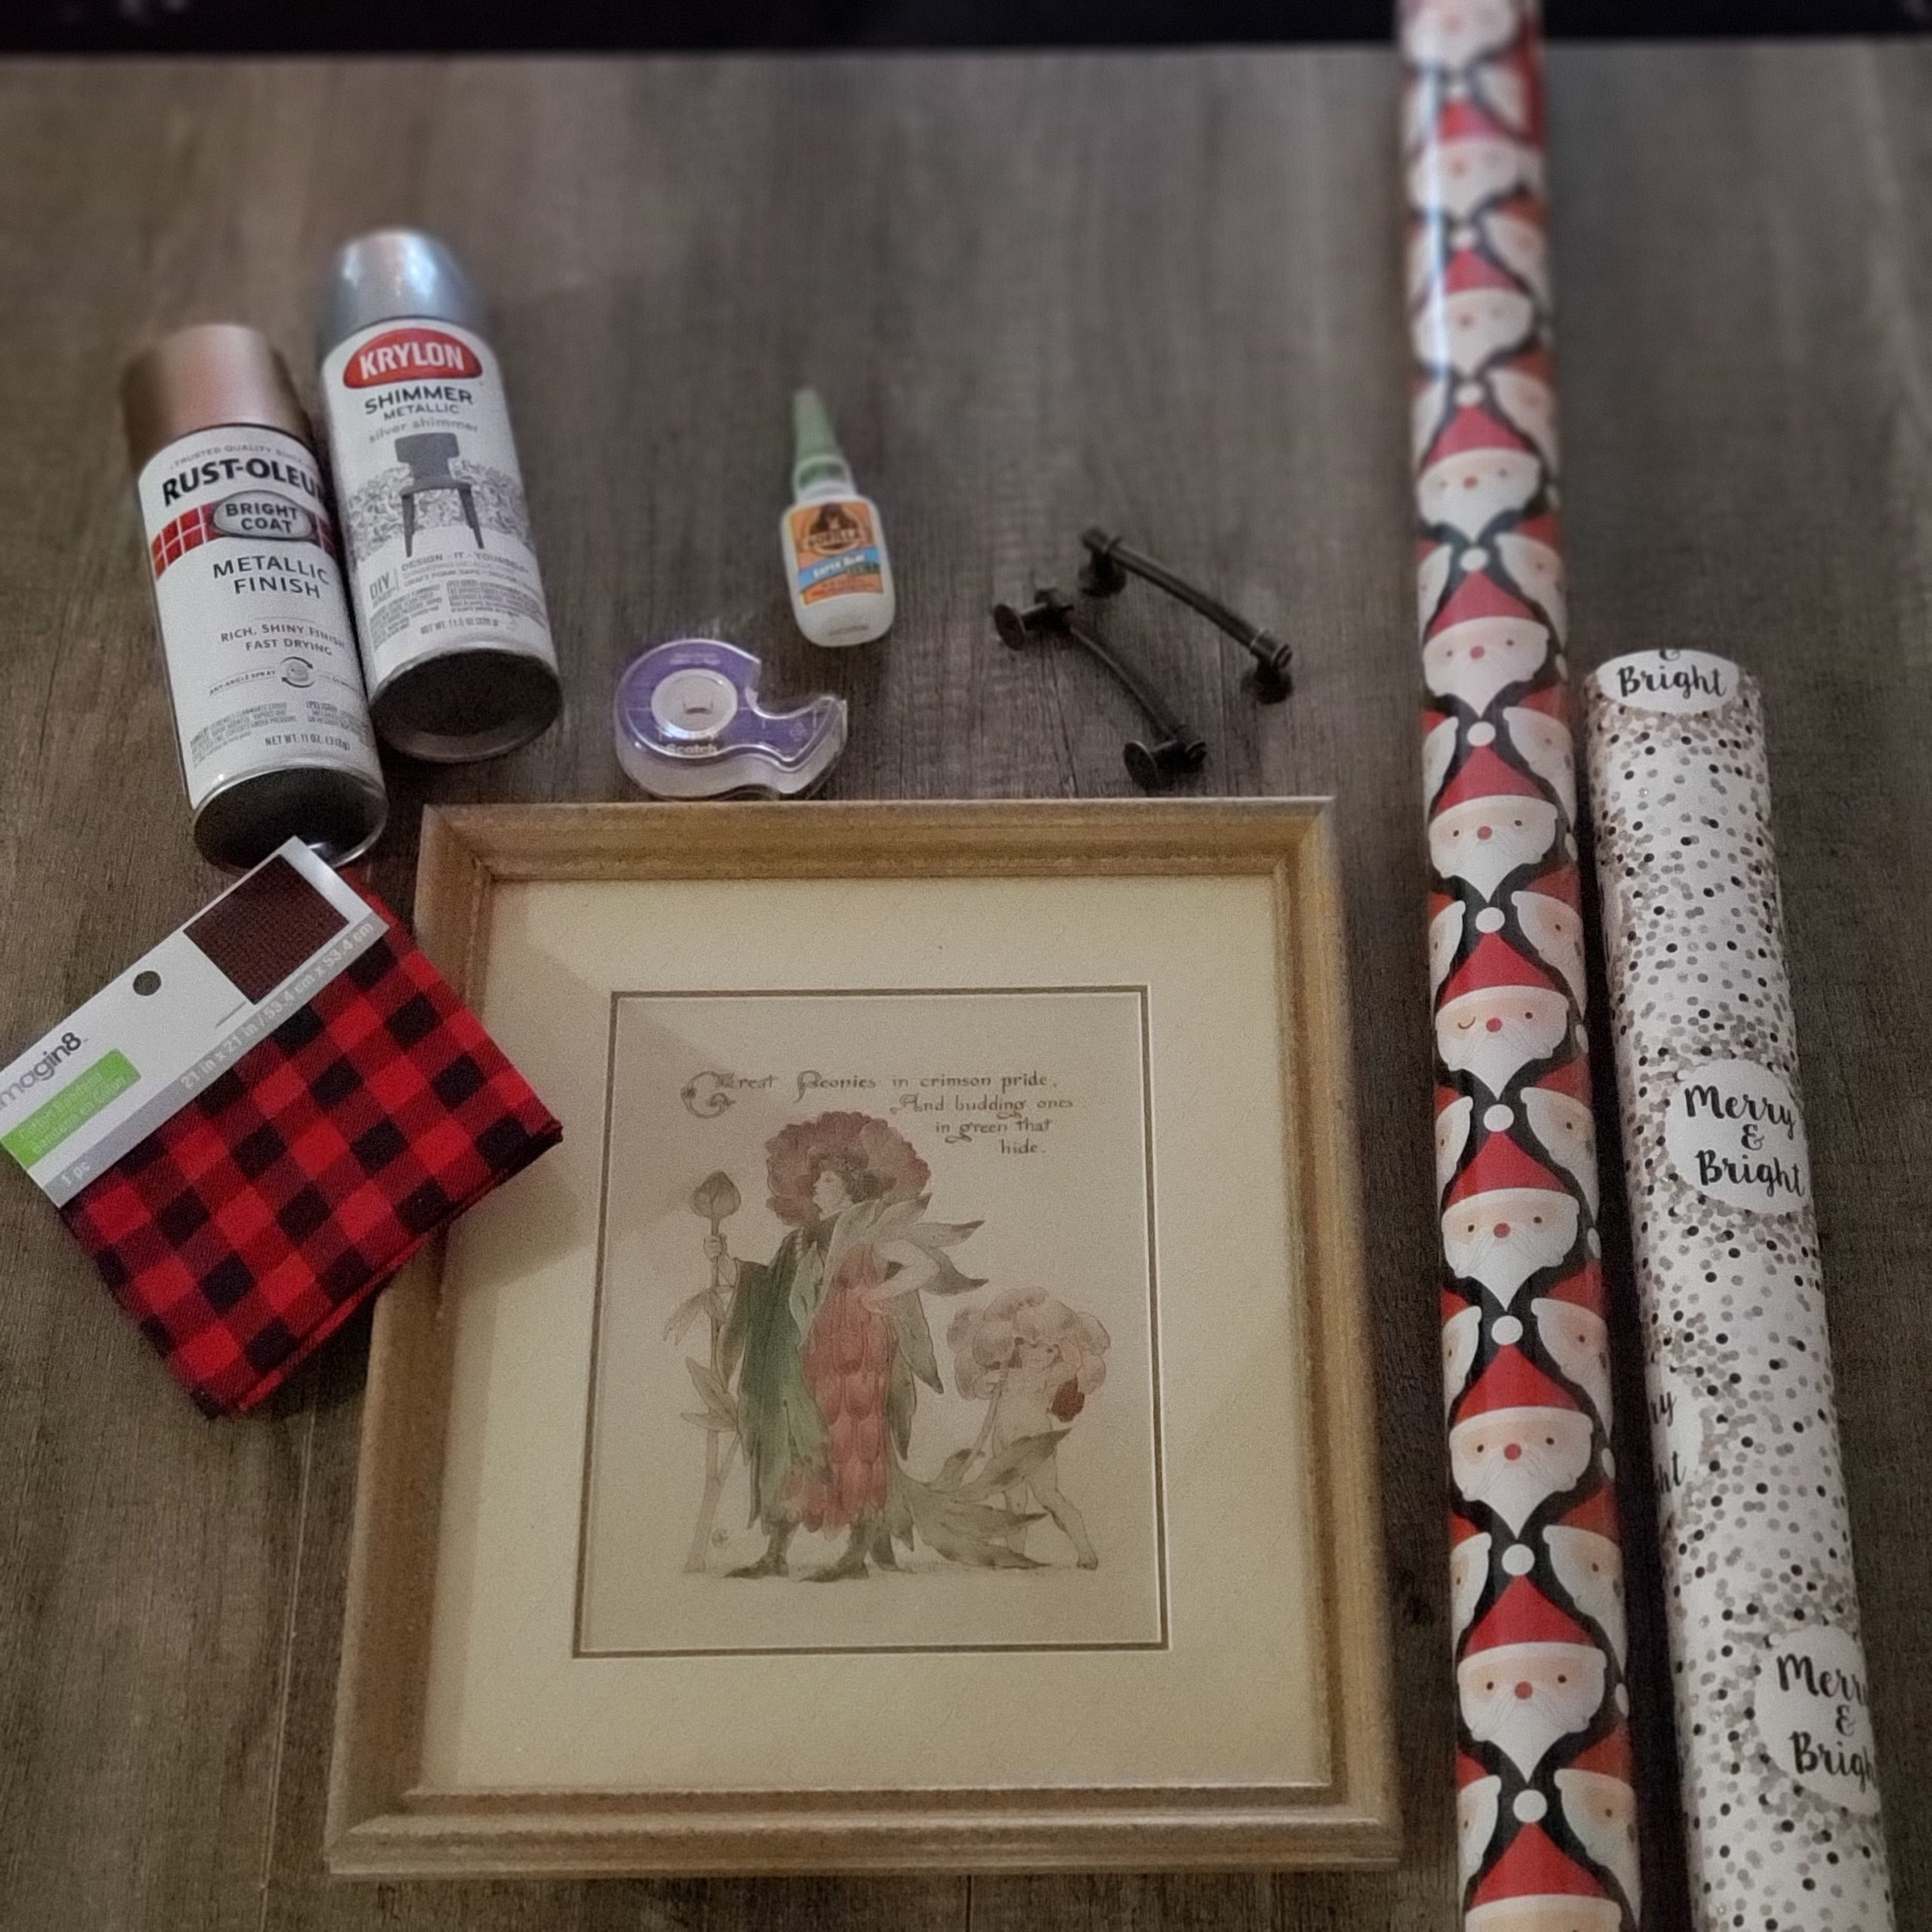 Supplies for picture frame tray